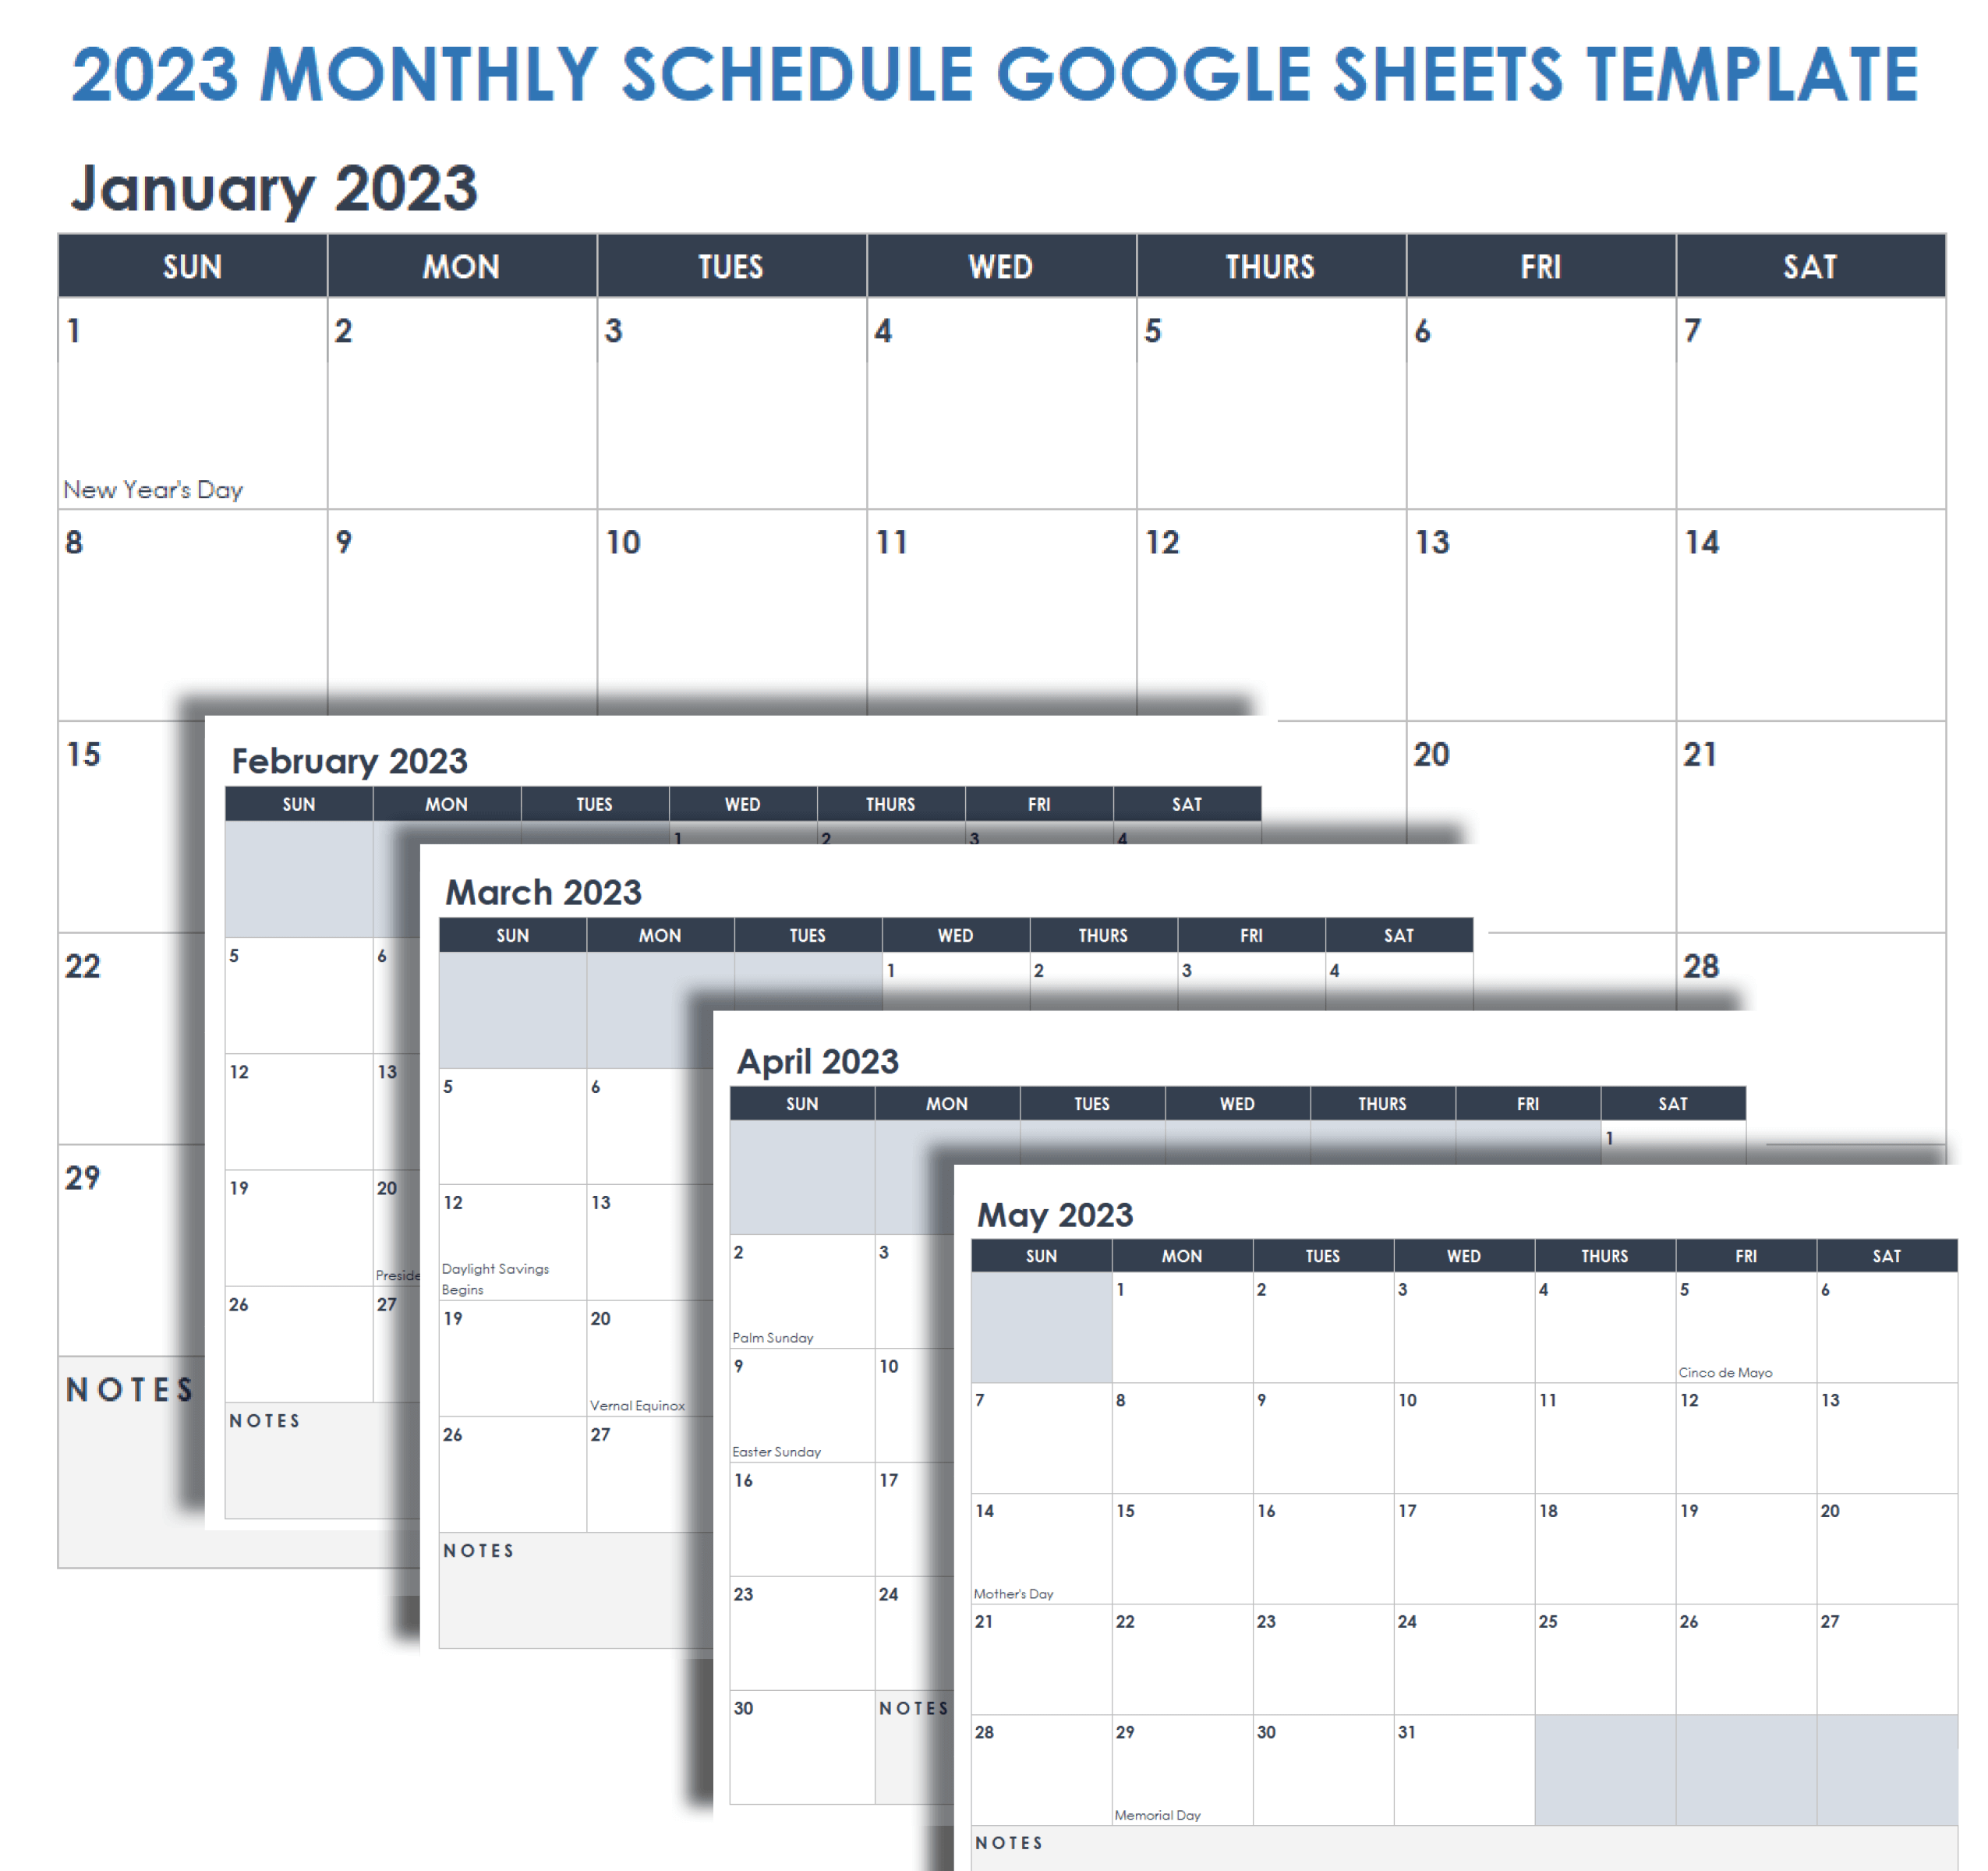 2023 Monthly Schedule Google Sheets Template